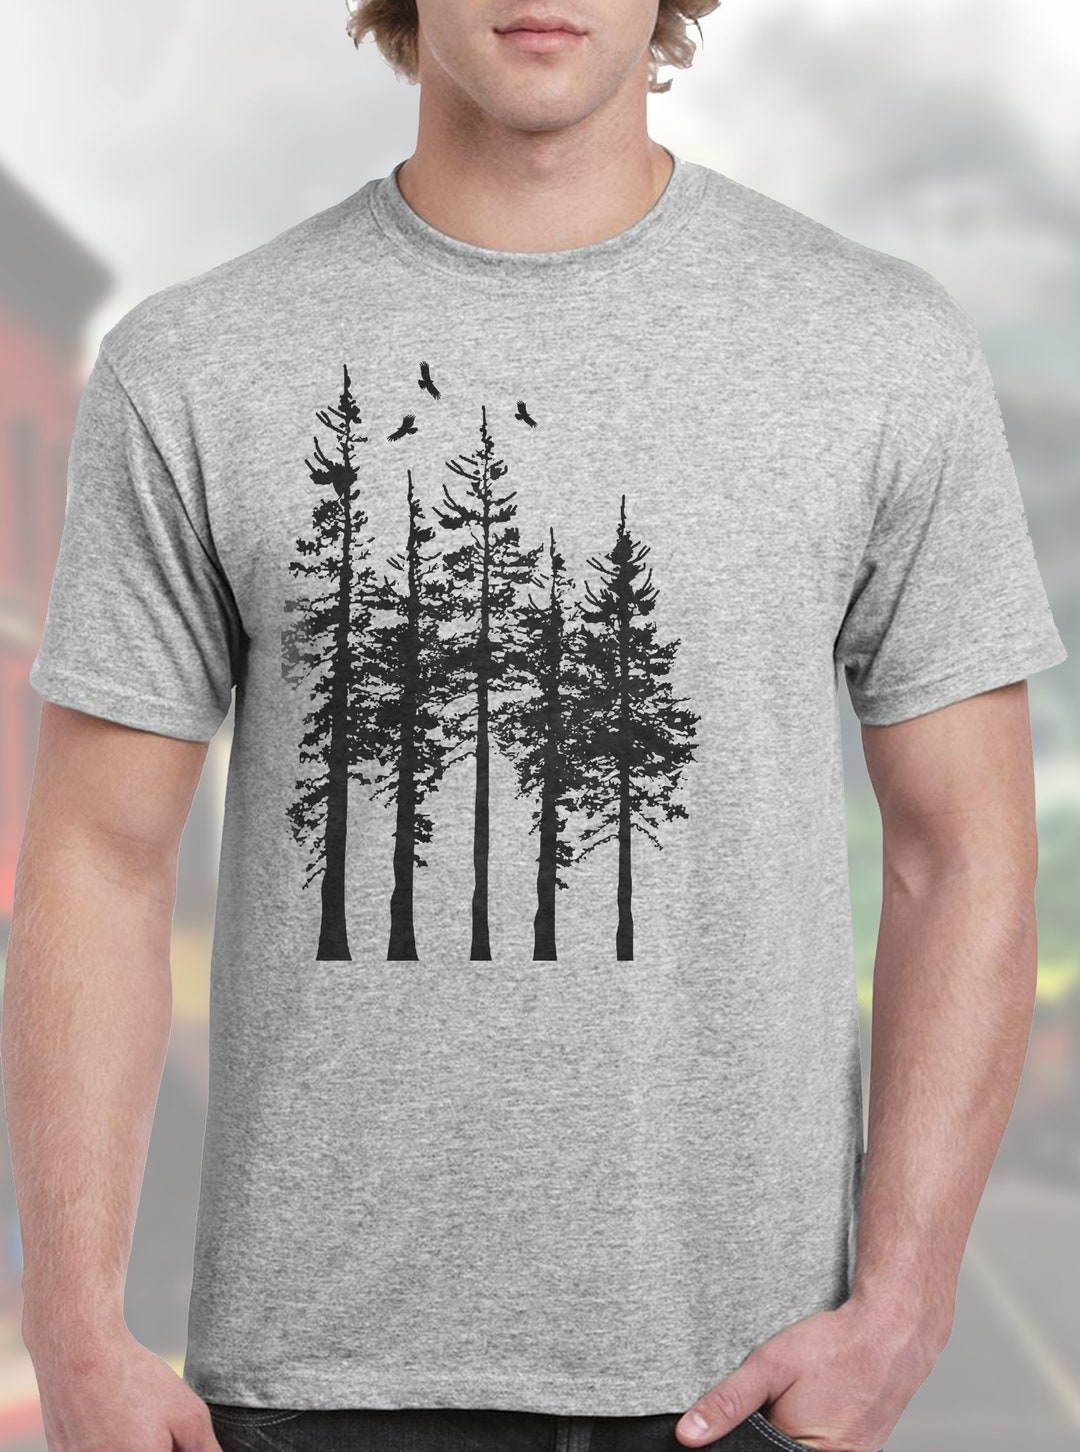 Men's Soft Graphic Tee old Growth Forest With Soaring - Etsy